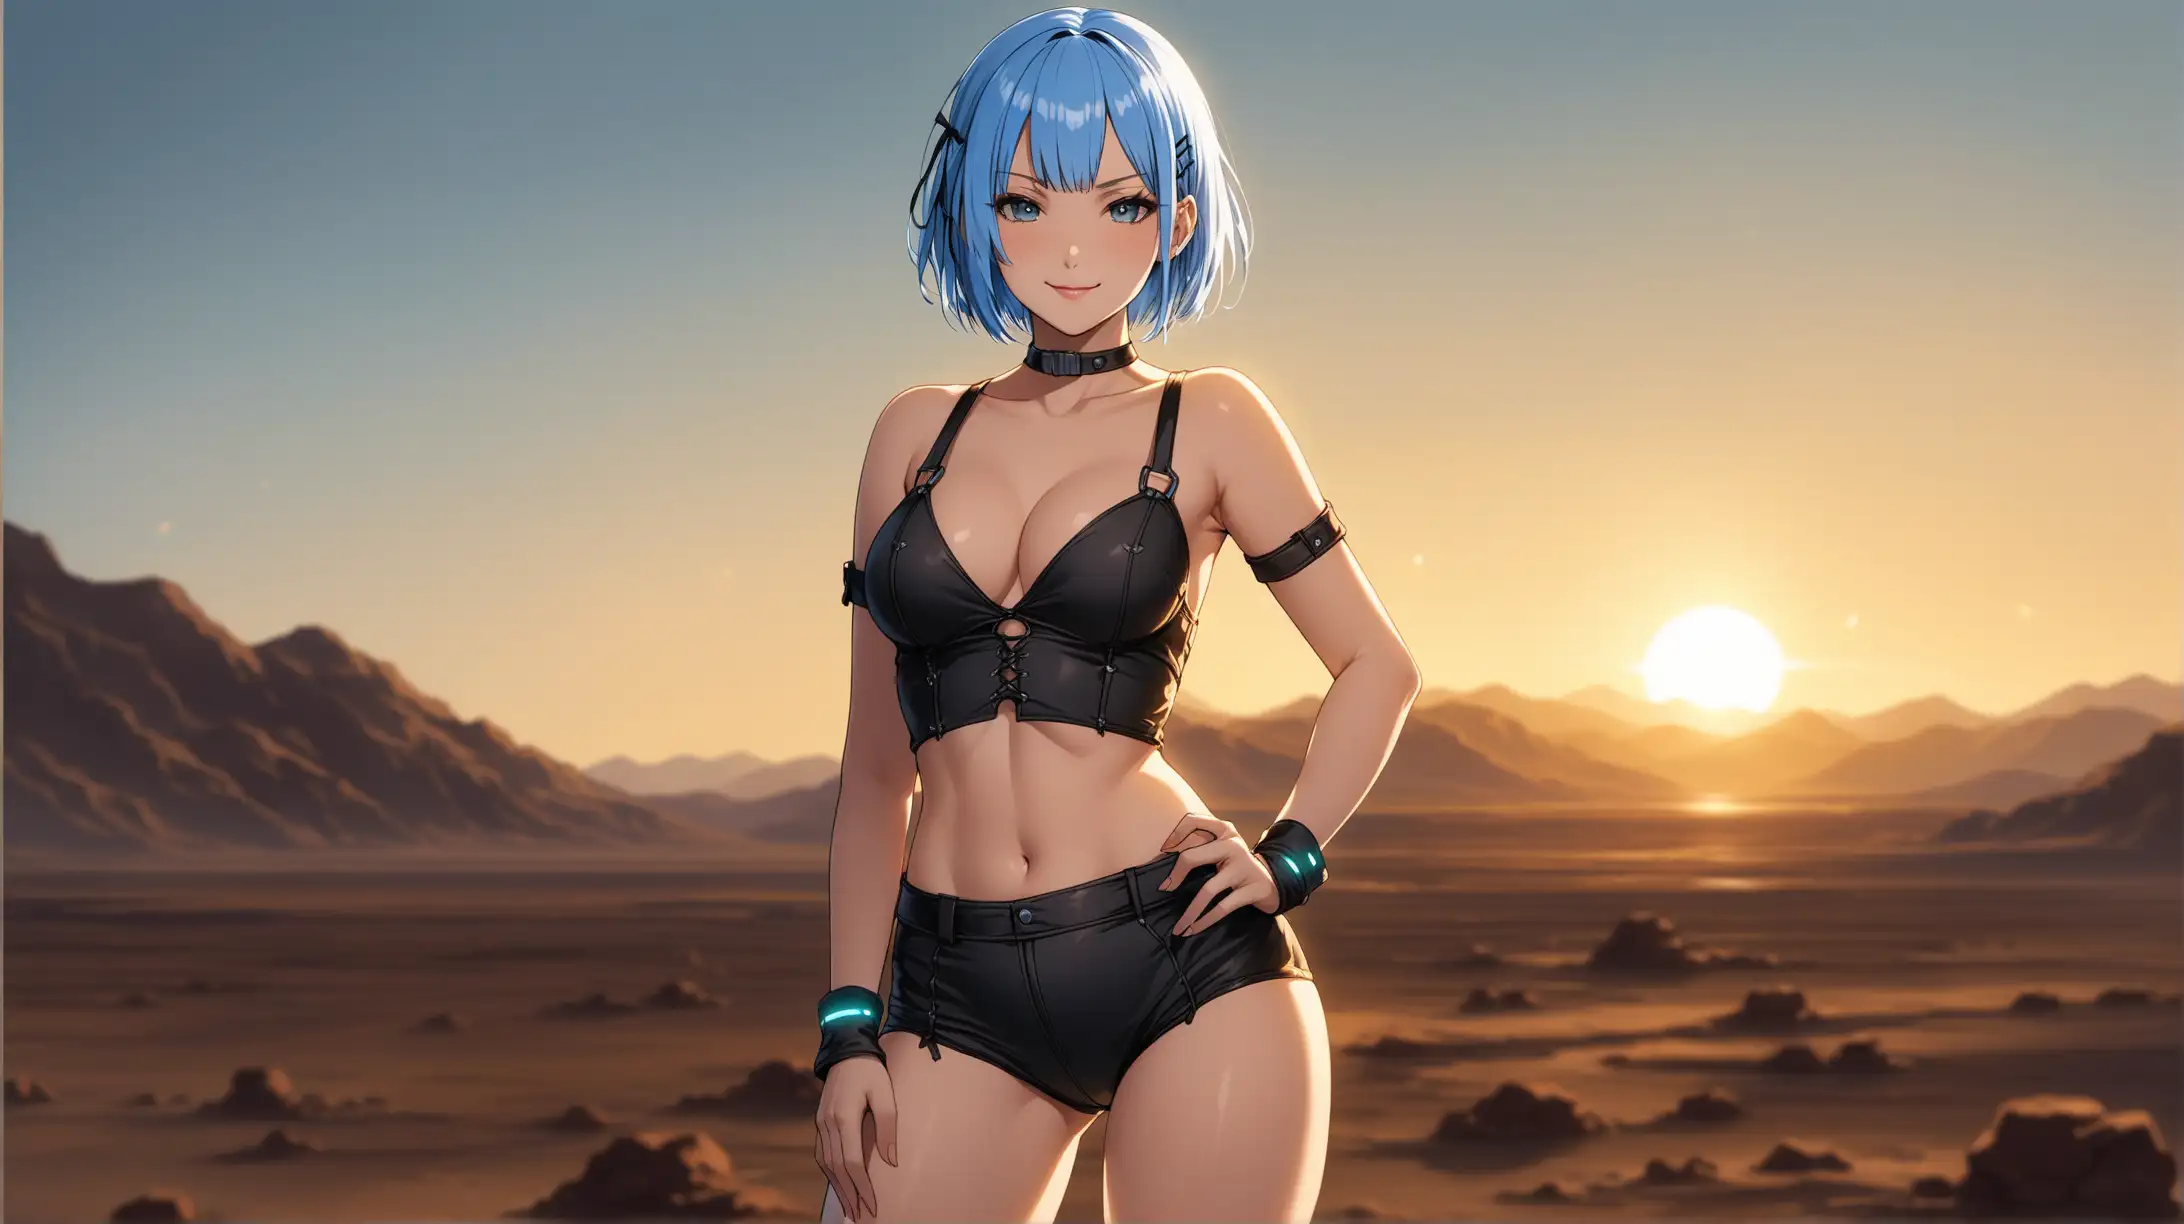 Seductive Rem Outdoors in FalloutInspired Outfit